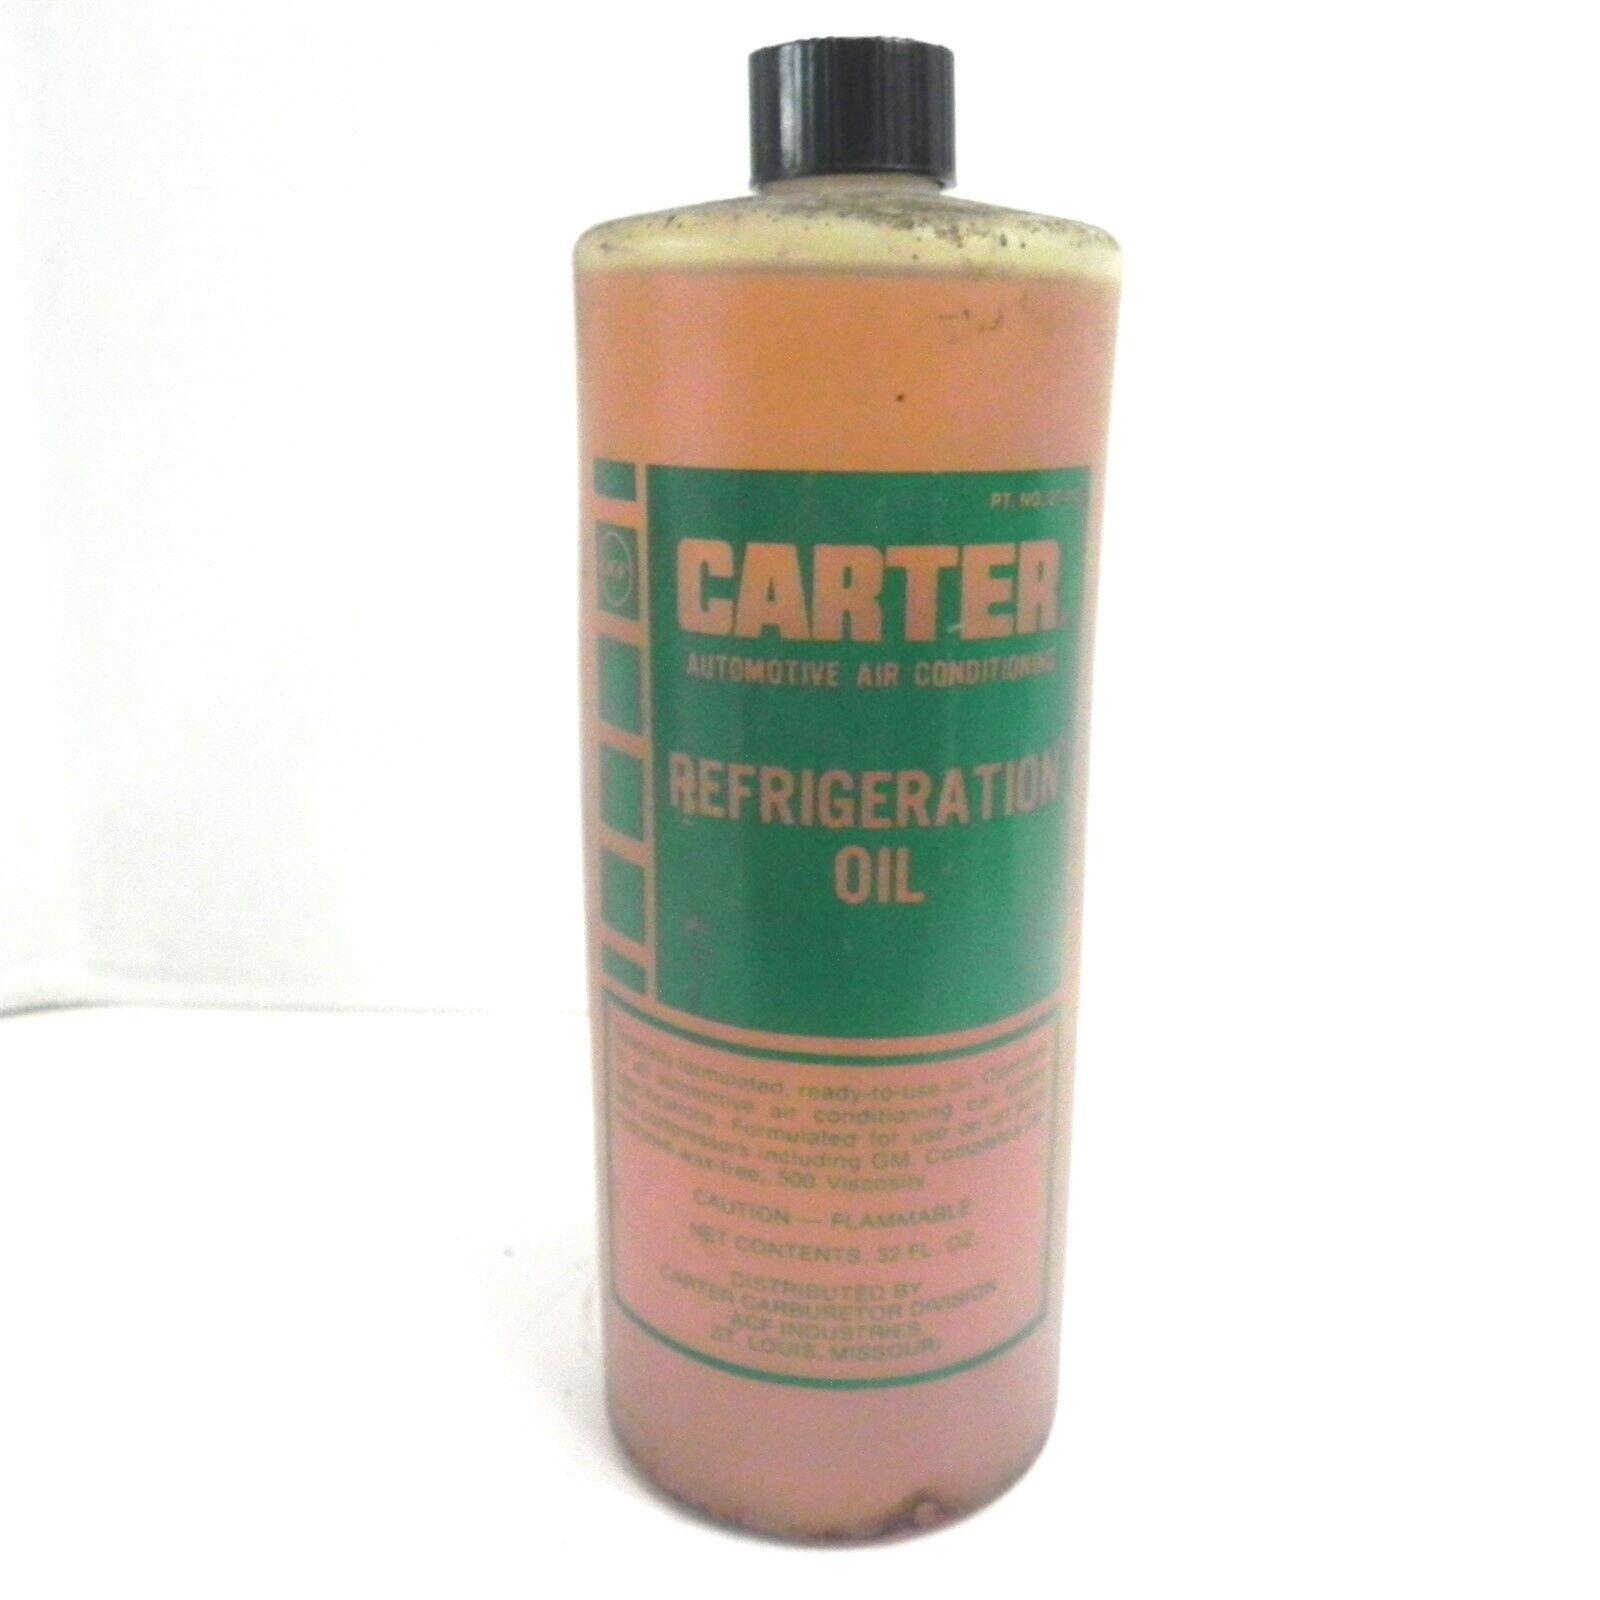 VINTAGE CARTER REFRIGERATION OIL 32 FL OZ BOTTLE EMPTY USED COLLECTABLE OIL CAN